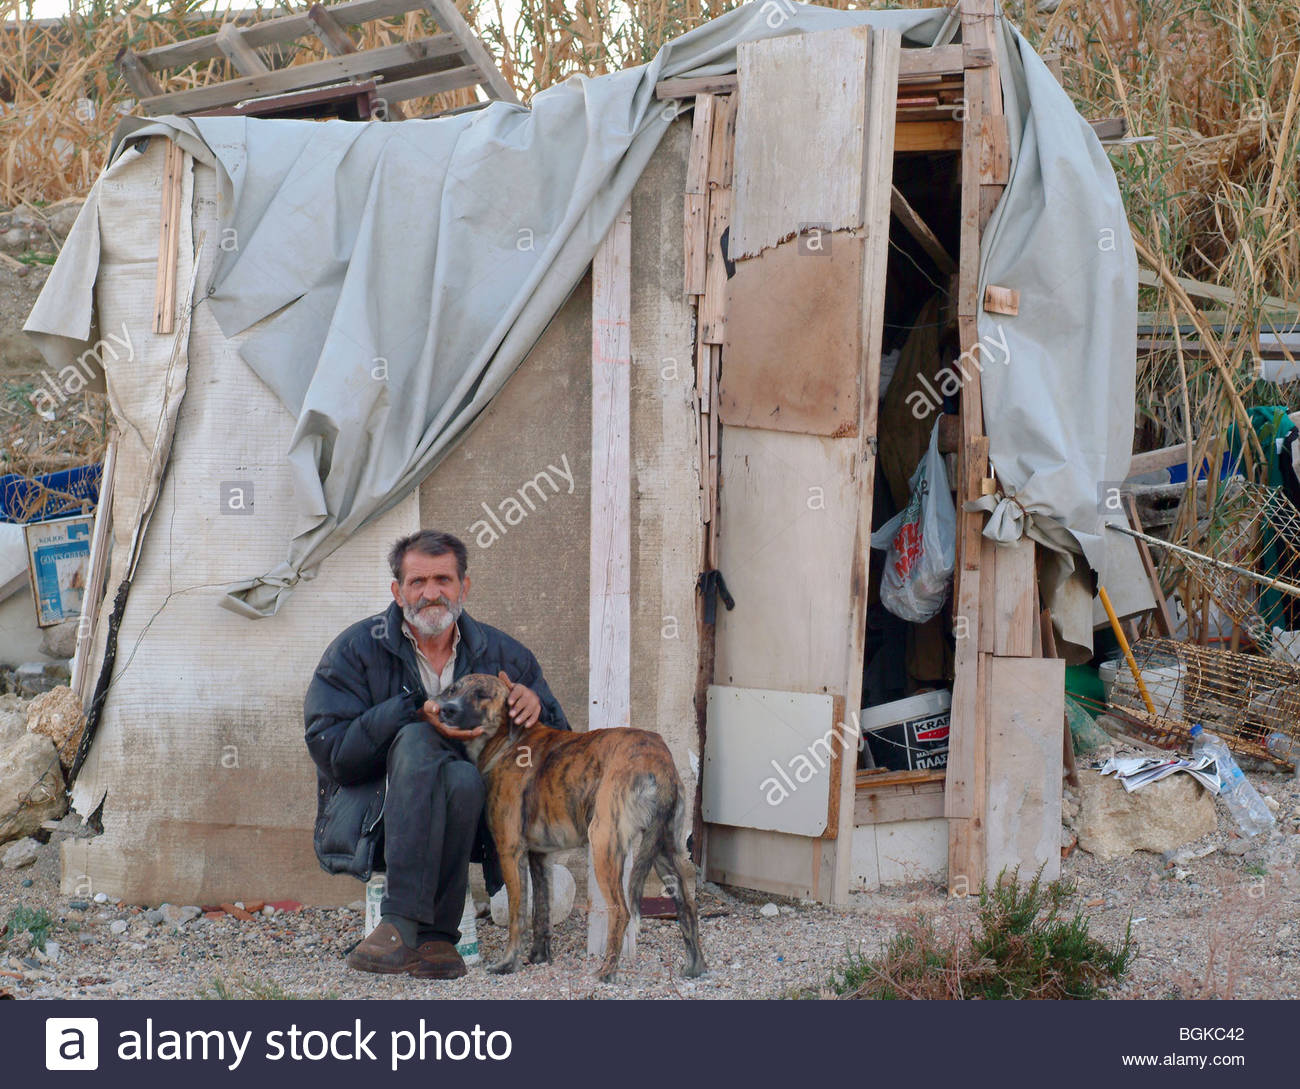 poor-greek-man-living-in-a-home-made-wooden-shack-on-the-beach-in-BGKC42.jpg